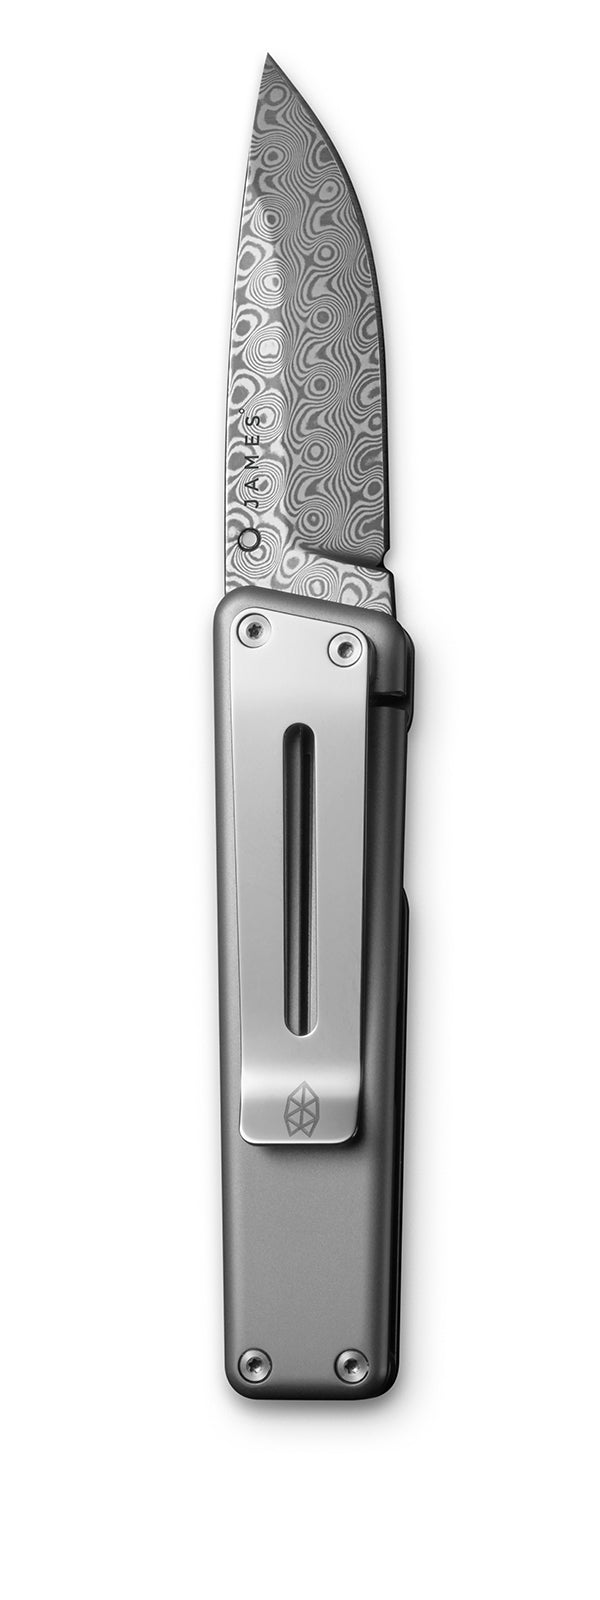 The Chapter knife, fully opened with the blade visible.